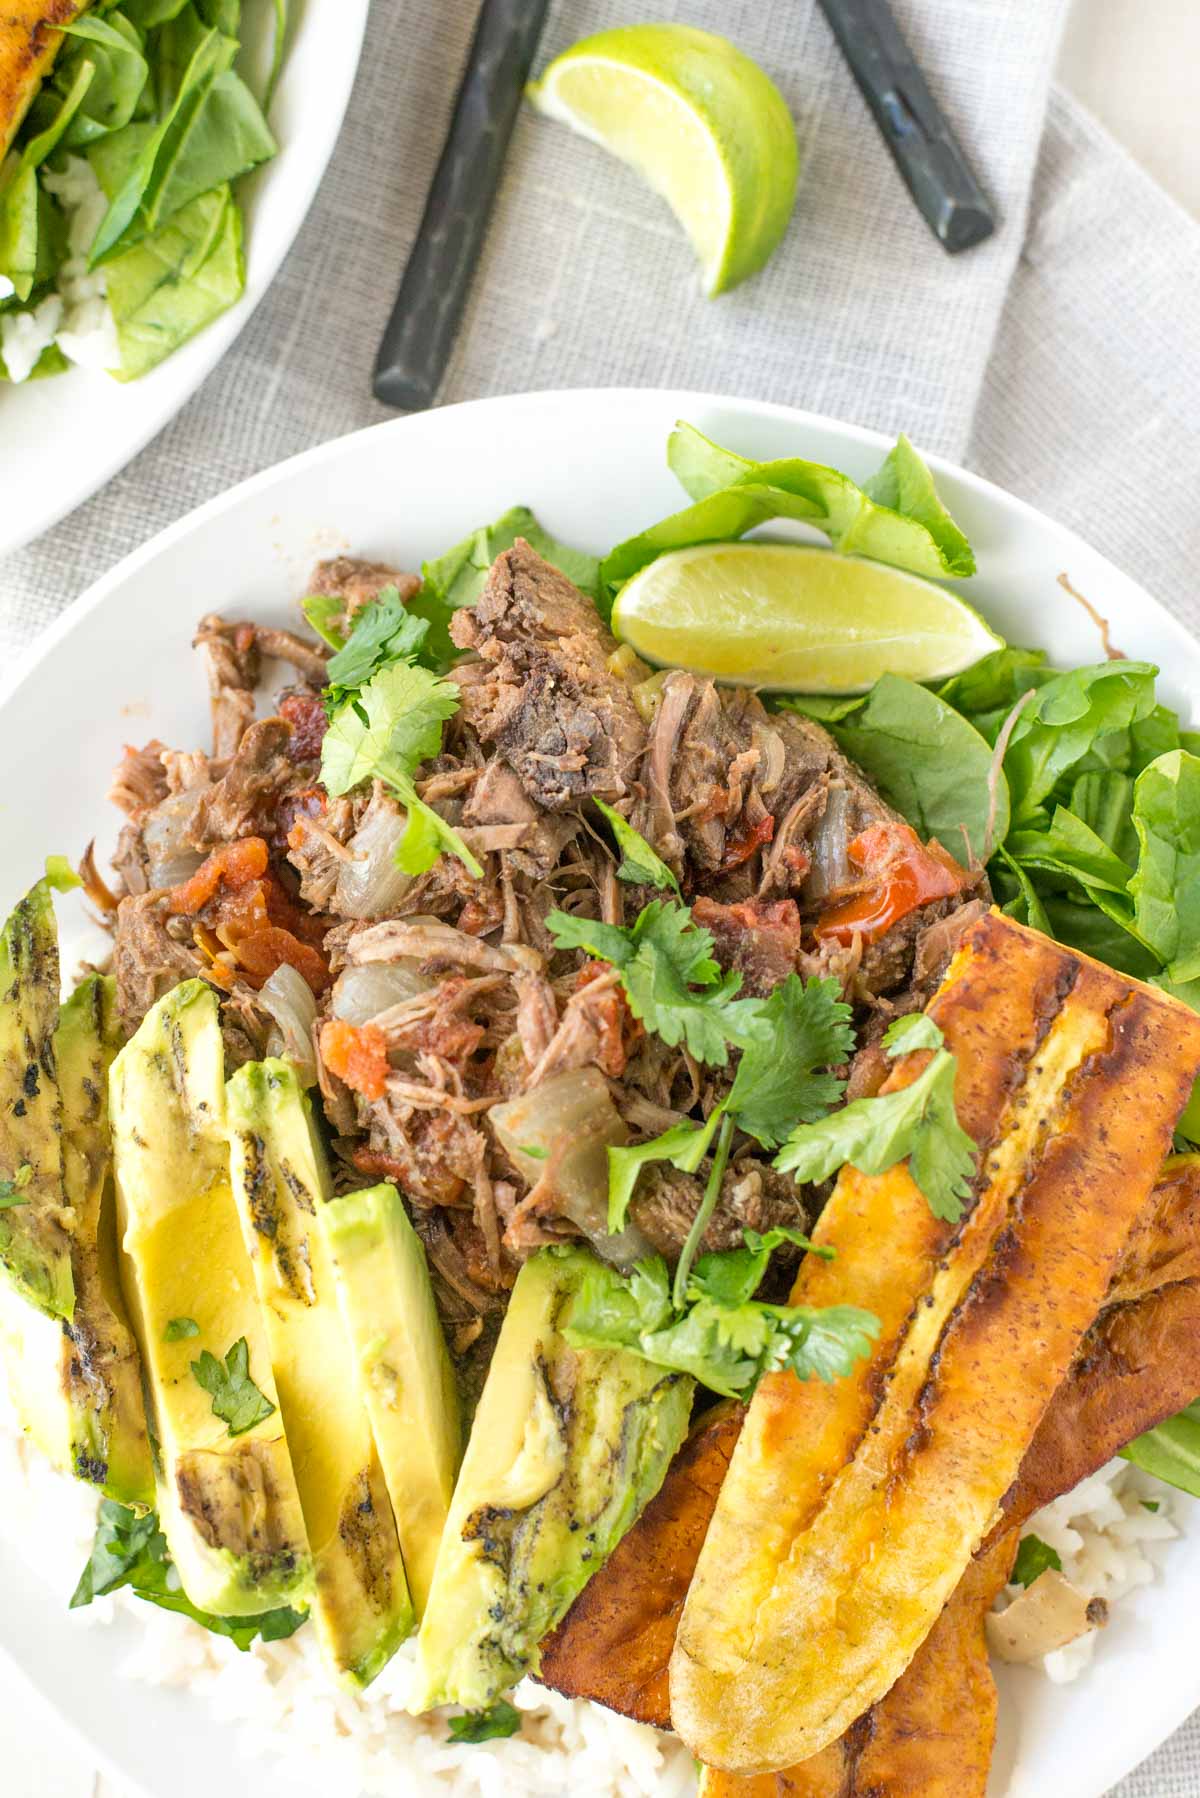 Looking for a quick and flavorful supper? This slow cooker barbacoa is just what you need.